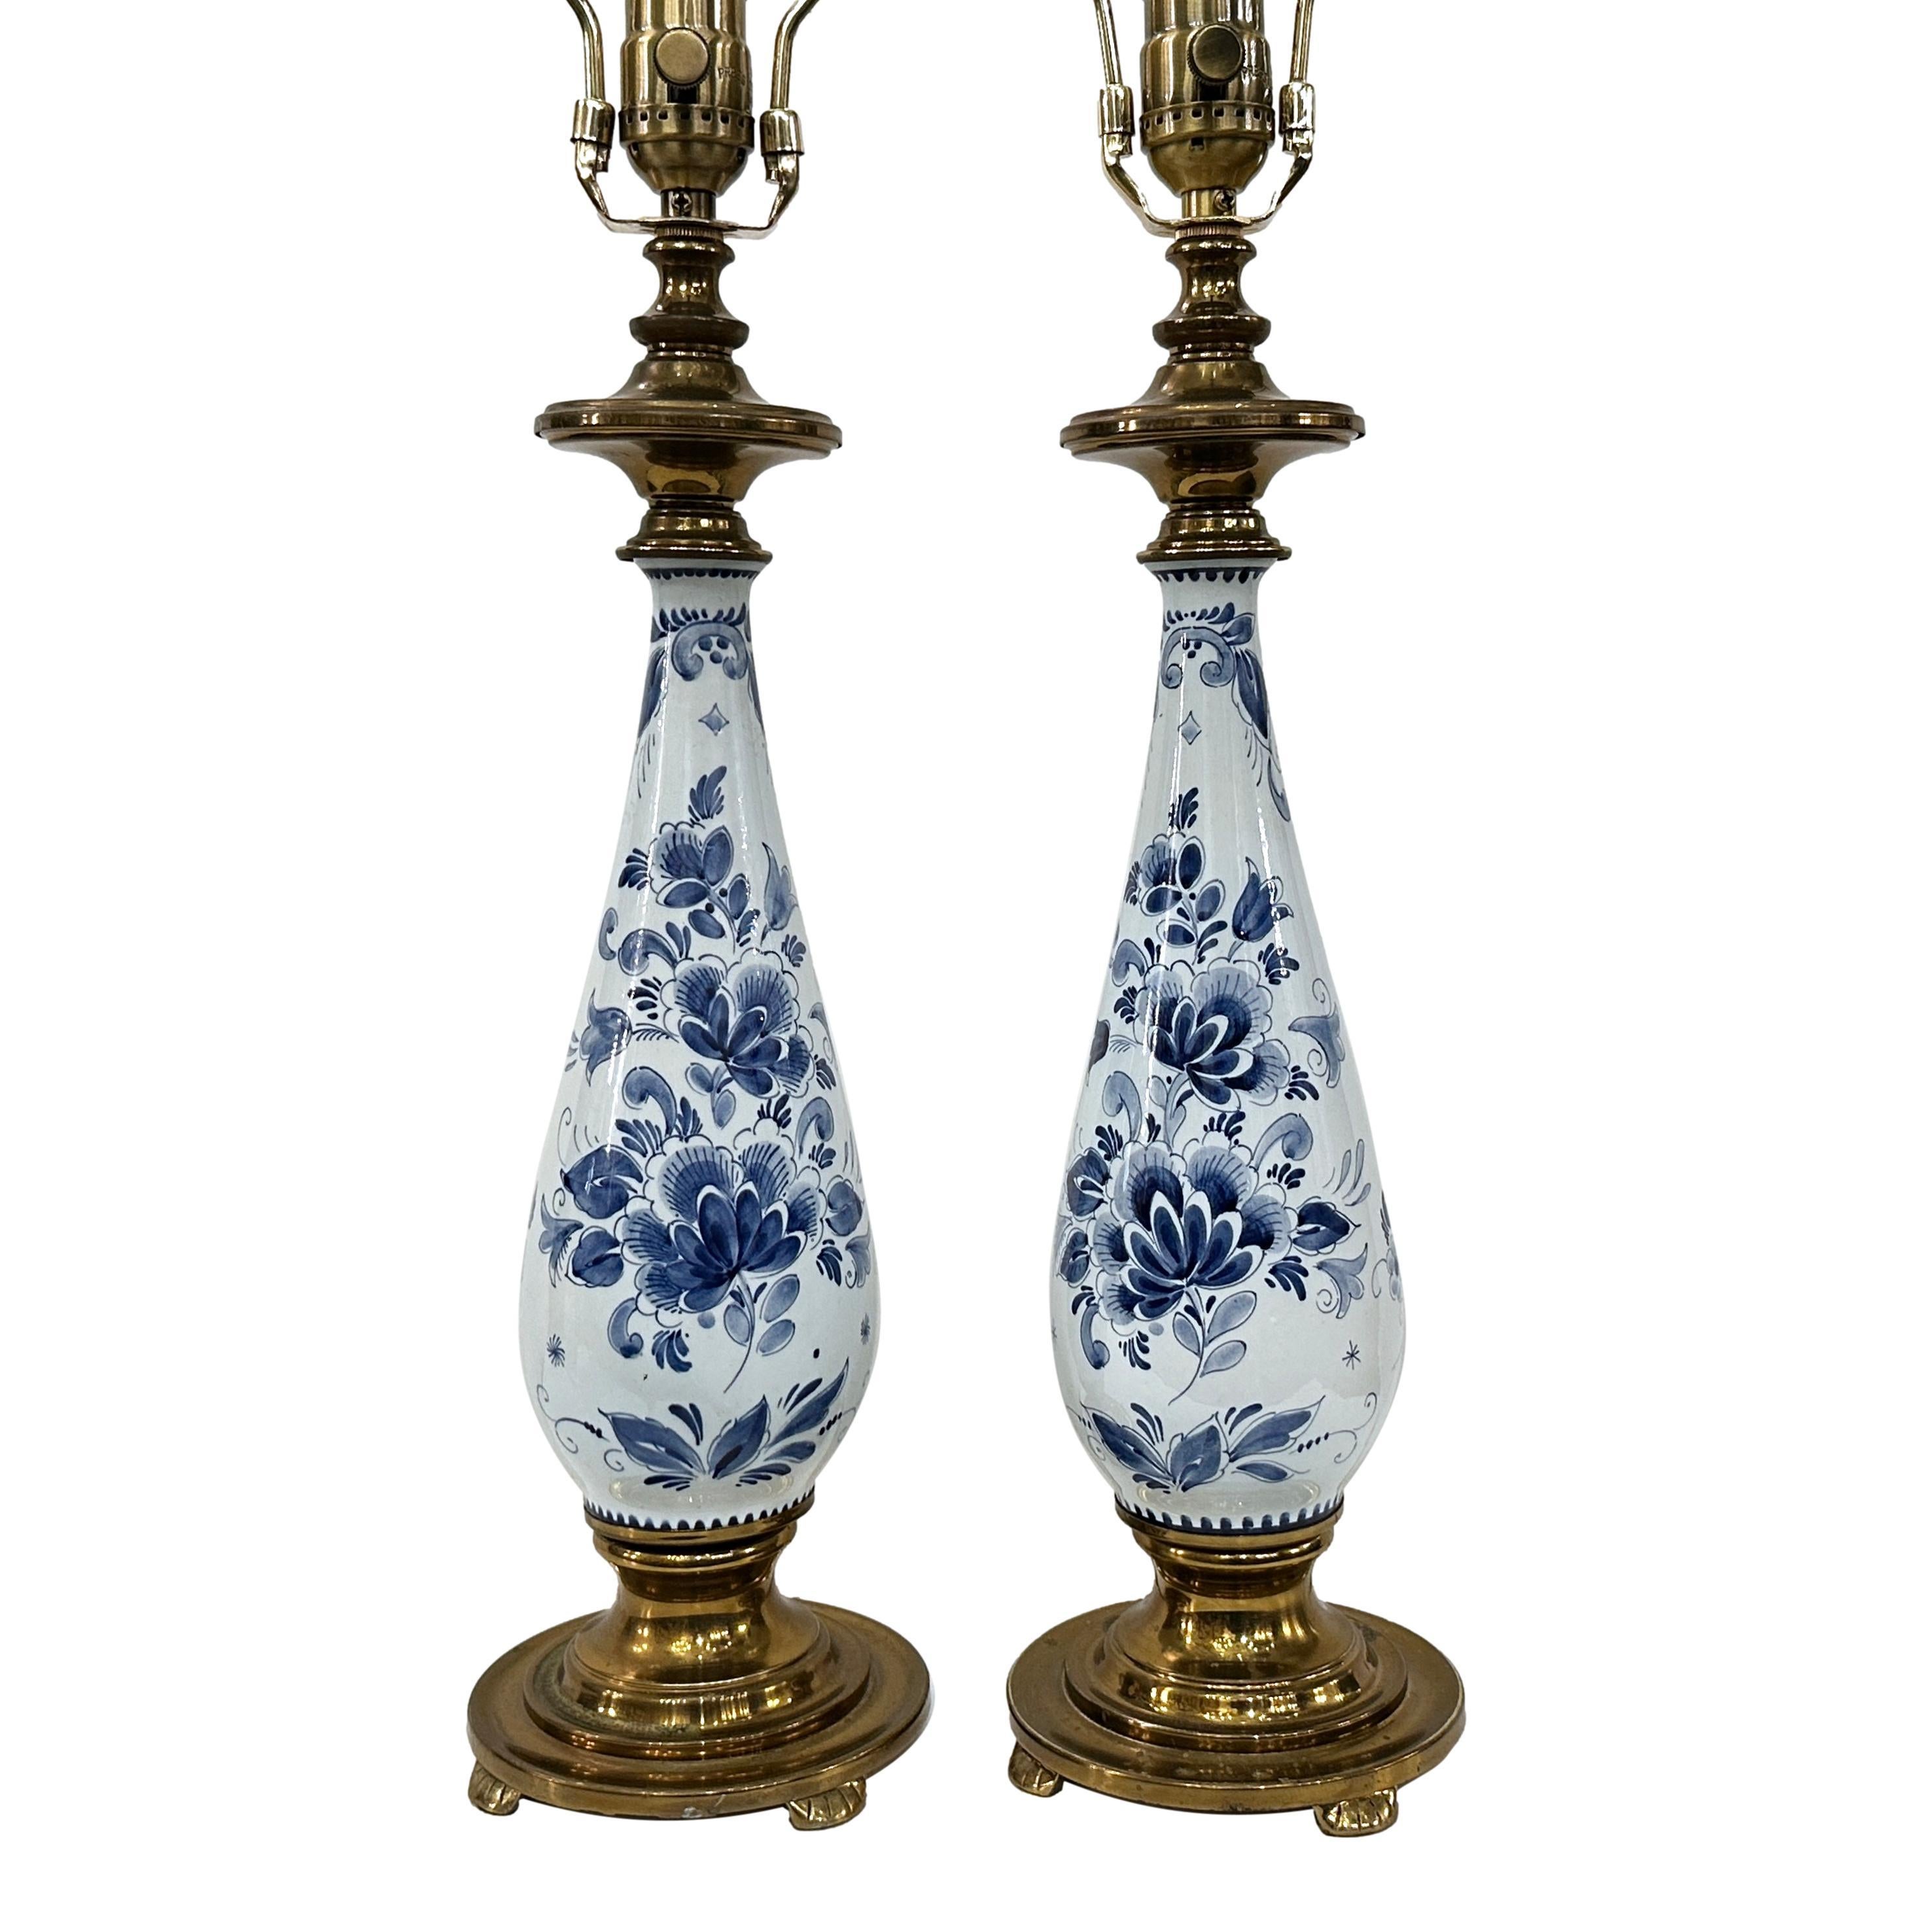 Pair of French 1940’s porcelain lamps with floral decoration

Measurements:
Height of body: 16